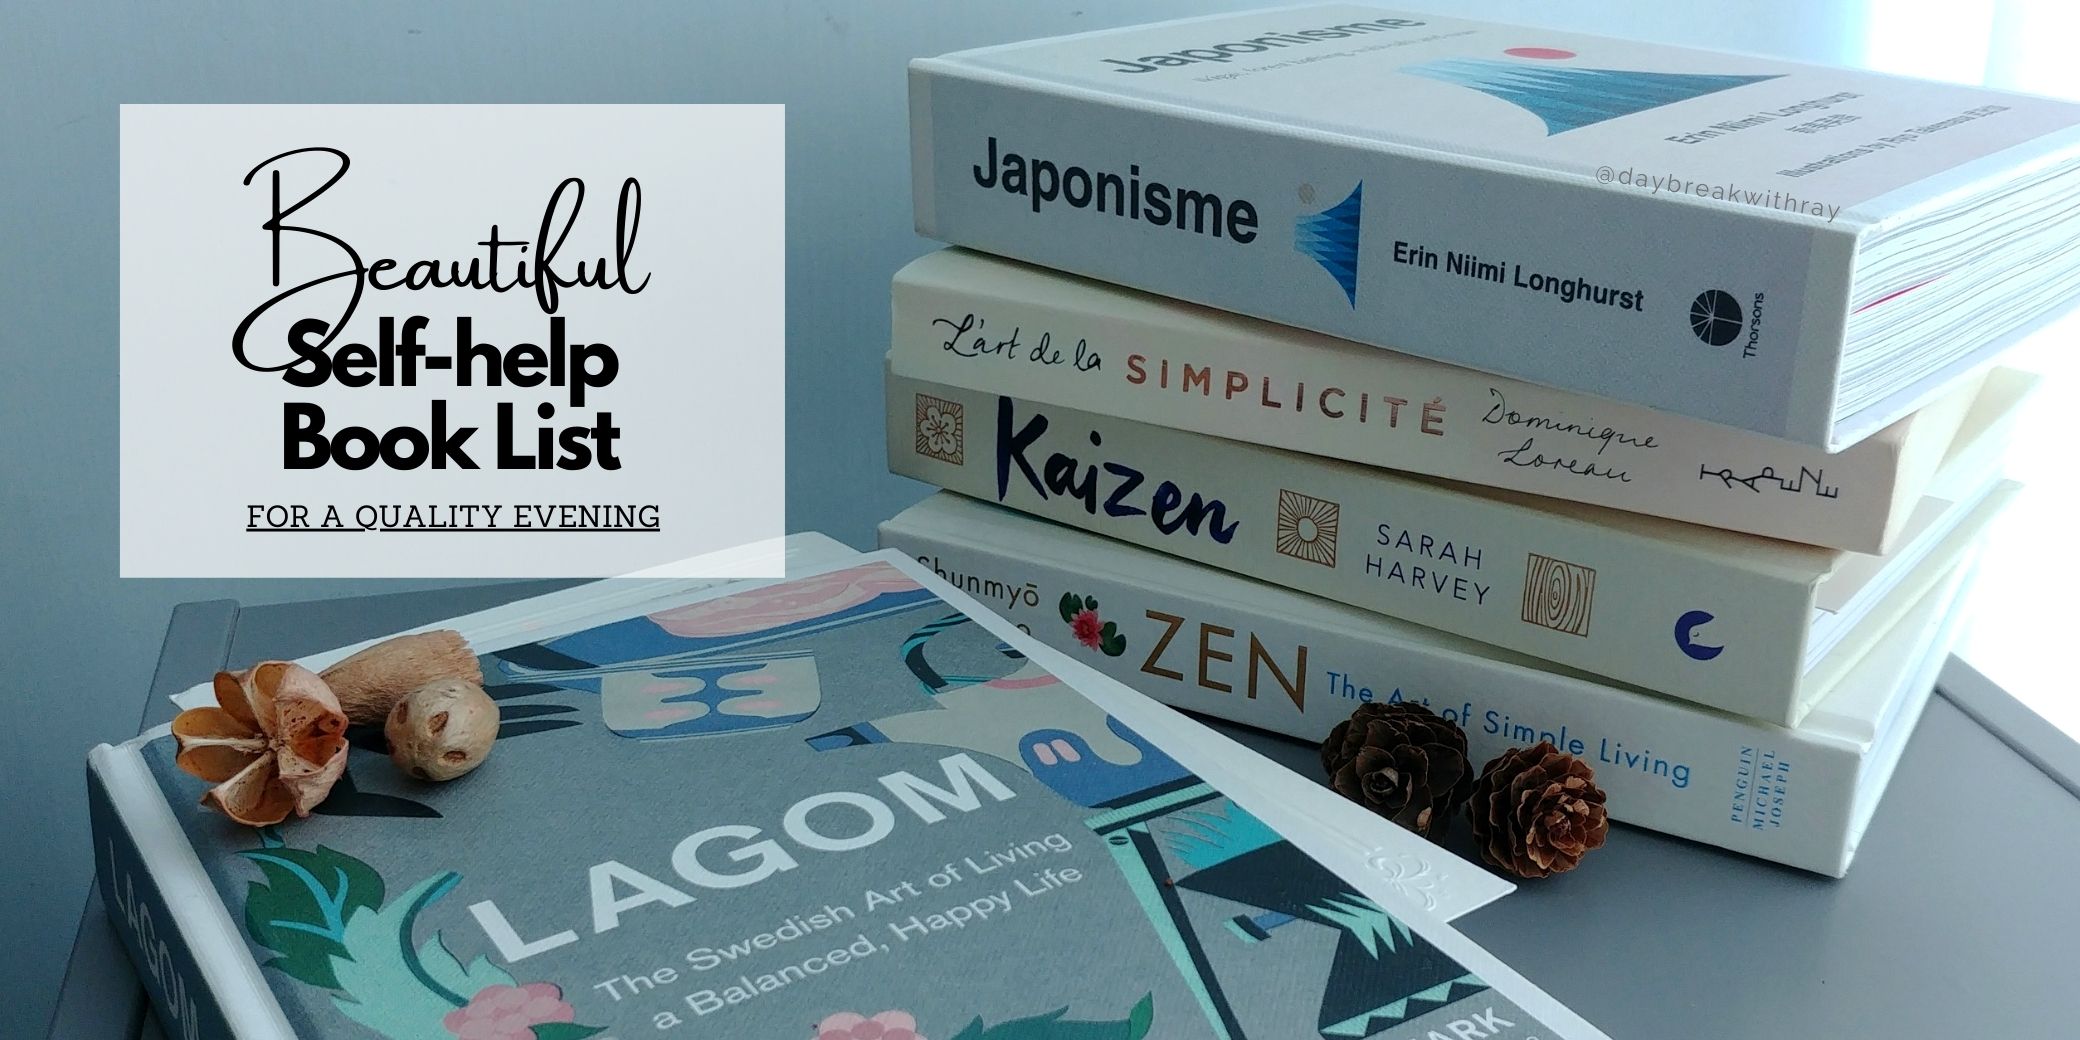 (Featured Image) Self-help book list